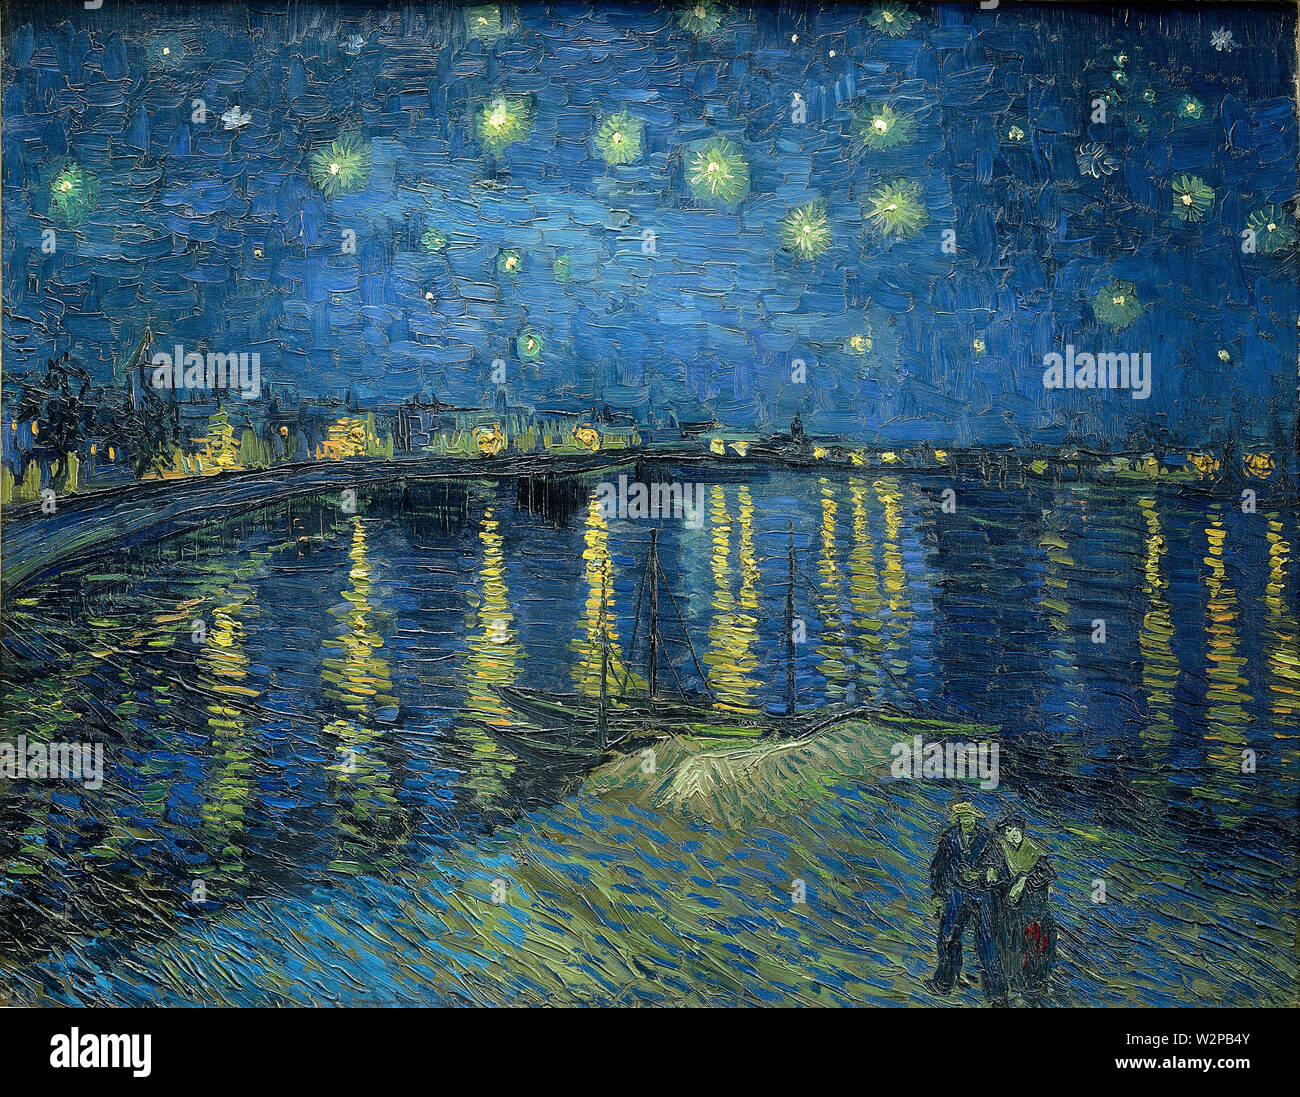 Starry Night Over the Rhone (Nuit étoilée sur le Rhône) (1888) by Vincent van Gogh - Very high quality image of this masterpiece painting. Stock Photo